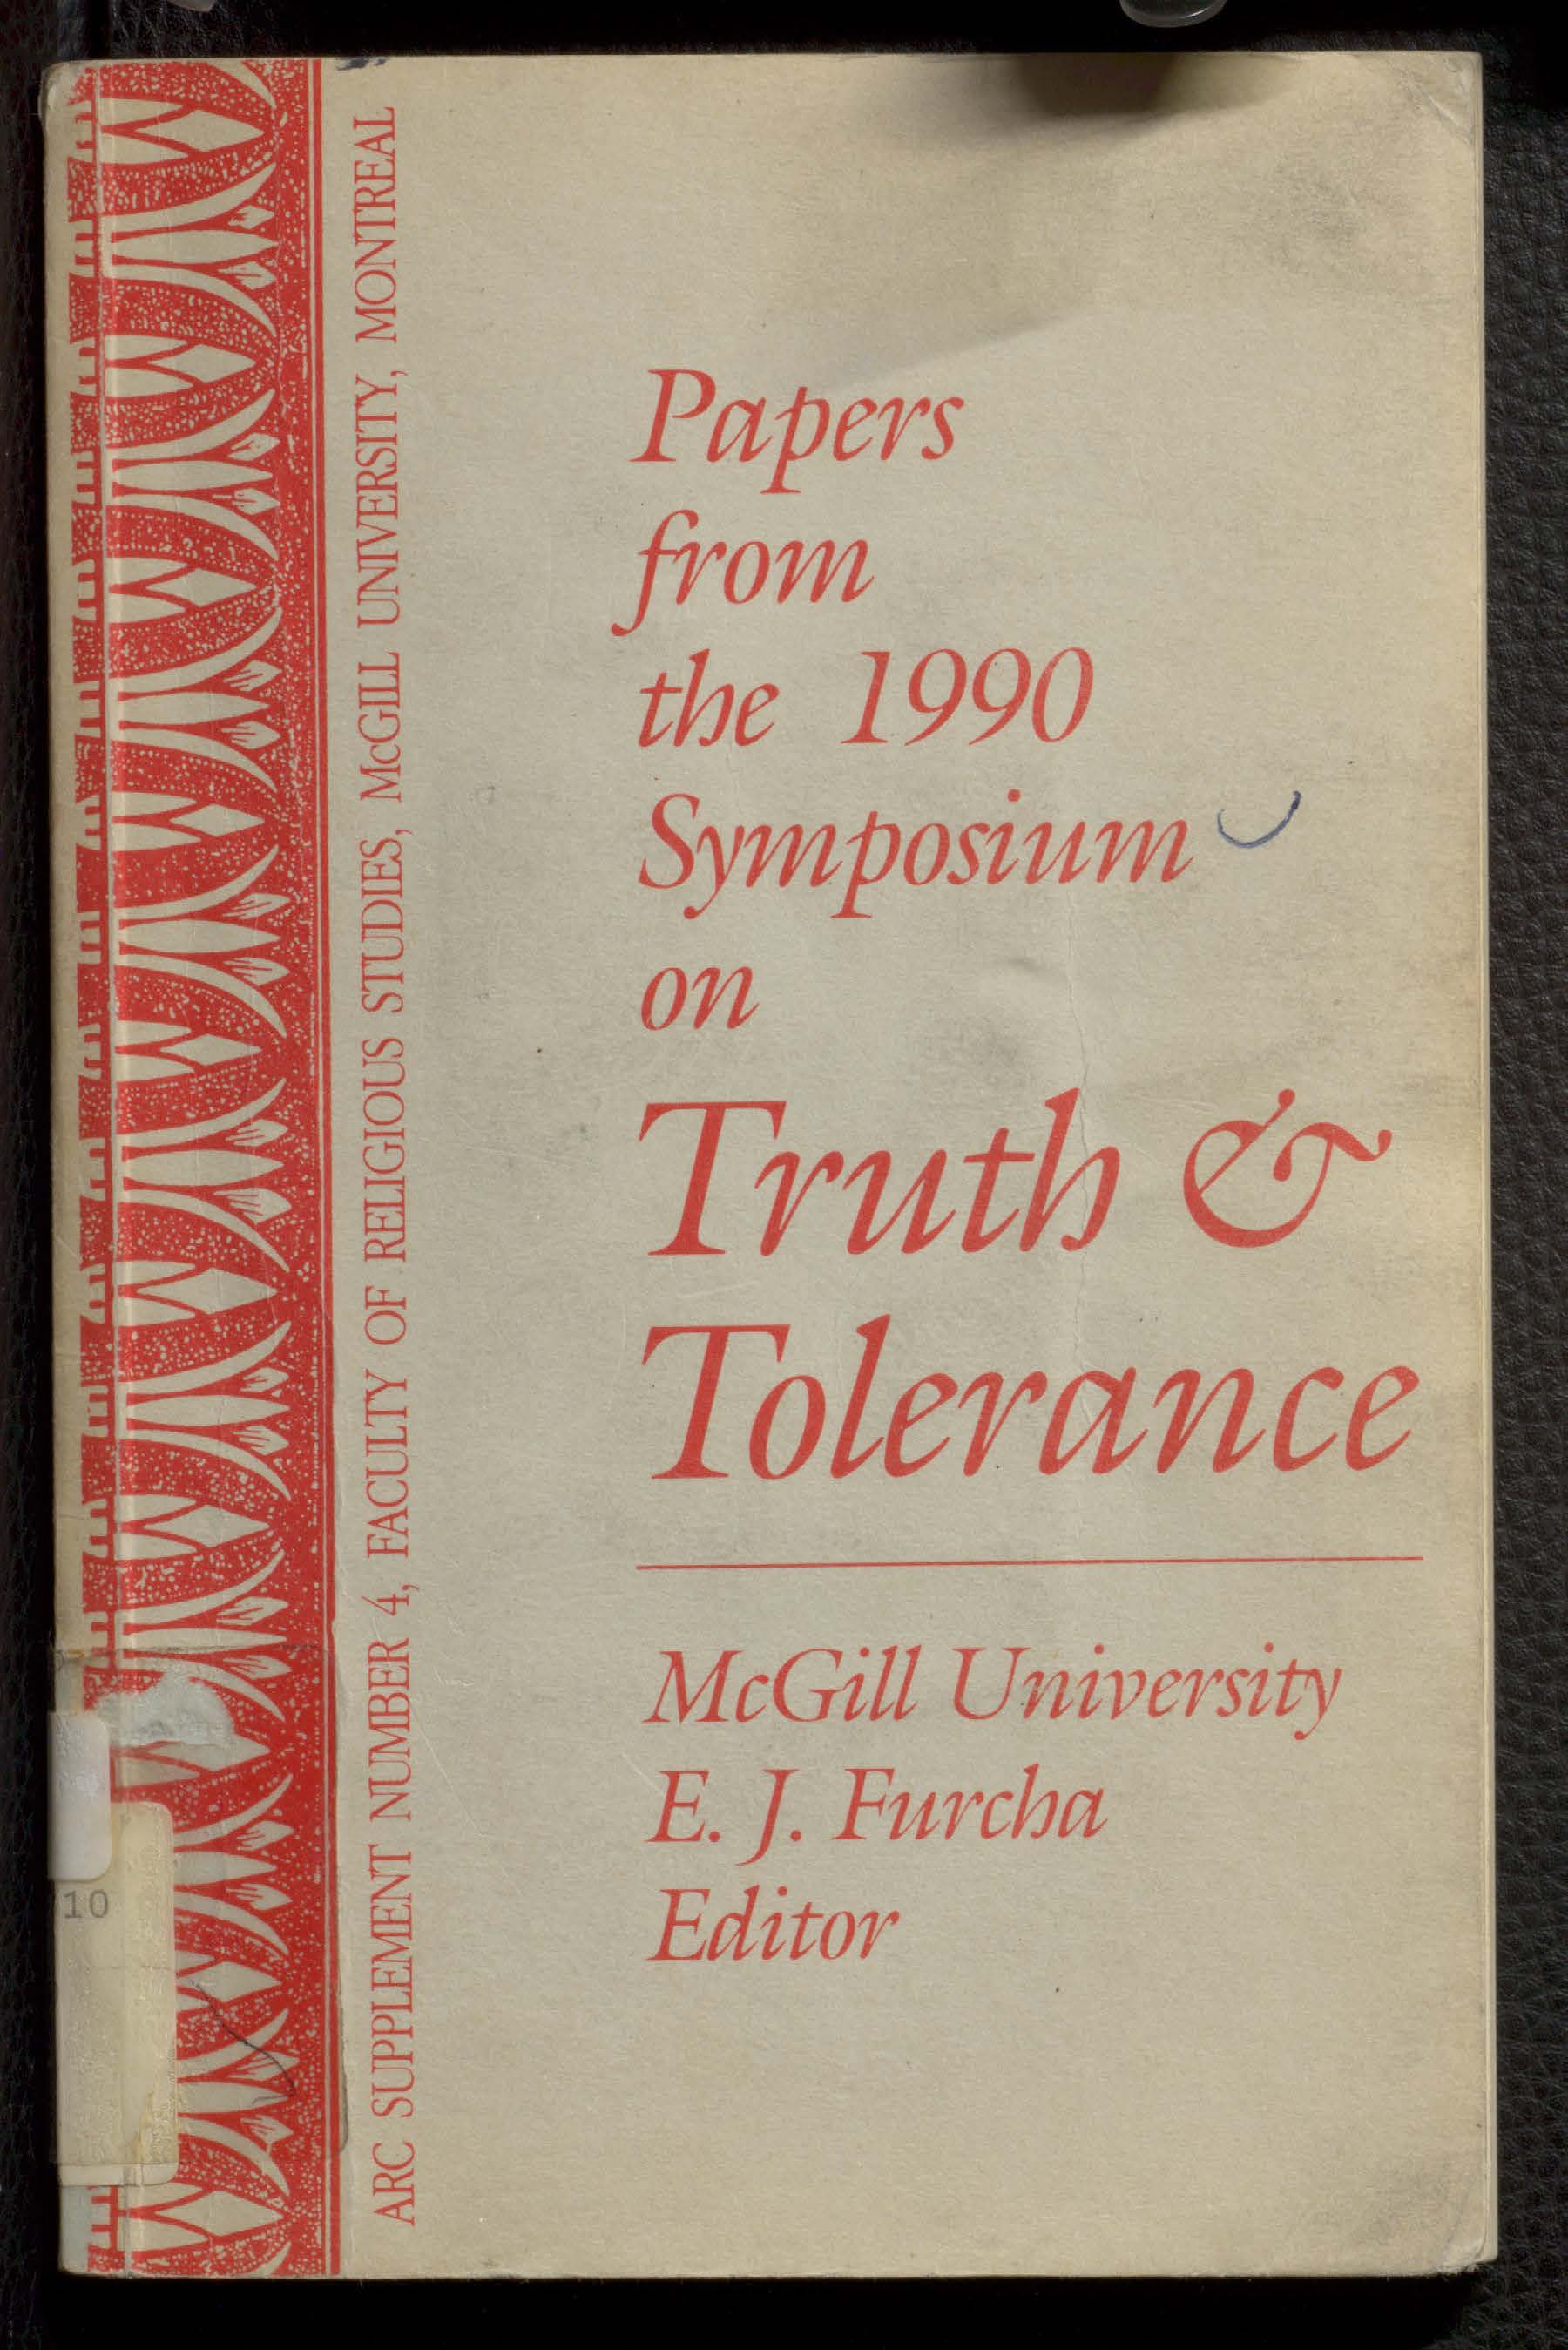 White cover with lacelike drawn edge in red ink along bound side of cover